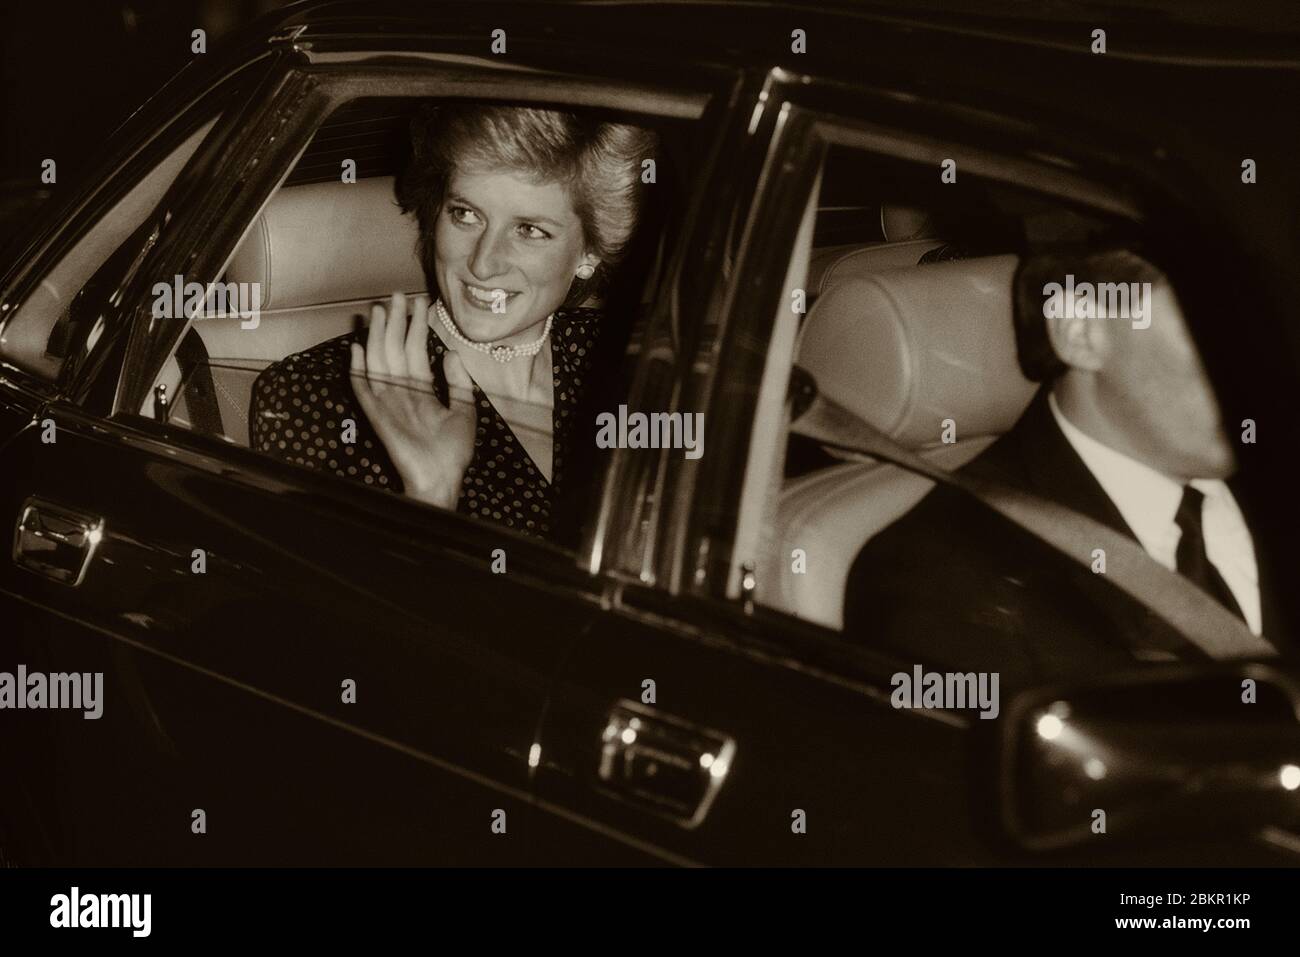 'Diana, Princess of Wales' waving and smiling in a chauffeur driven car after presenting the Help the Aged Elderly Achievement Awards at the Hilton Hotel, Park Lane, London, England. October 23 1989 Stock Photo